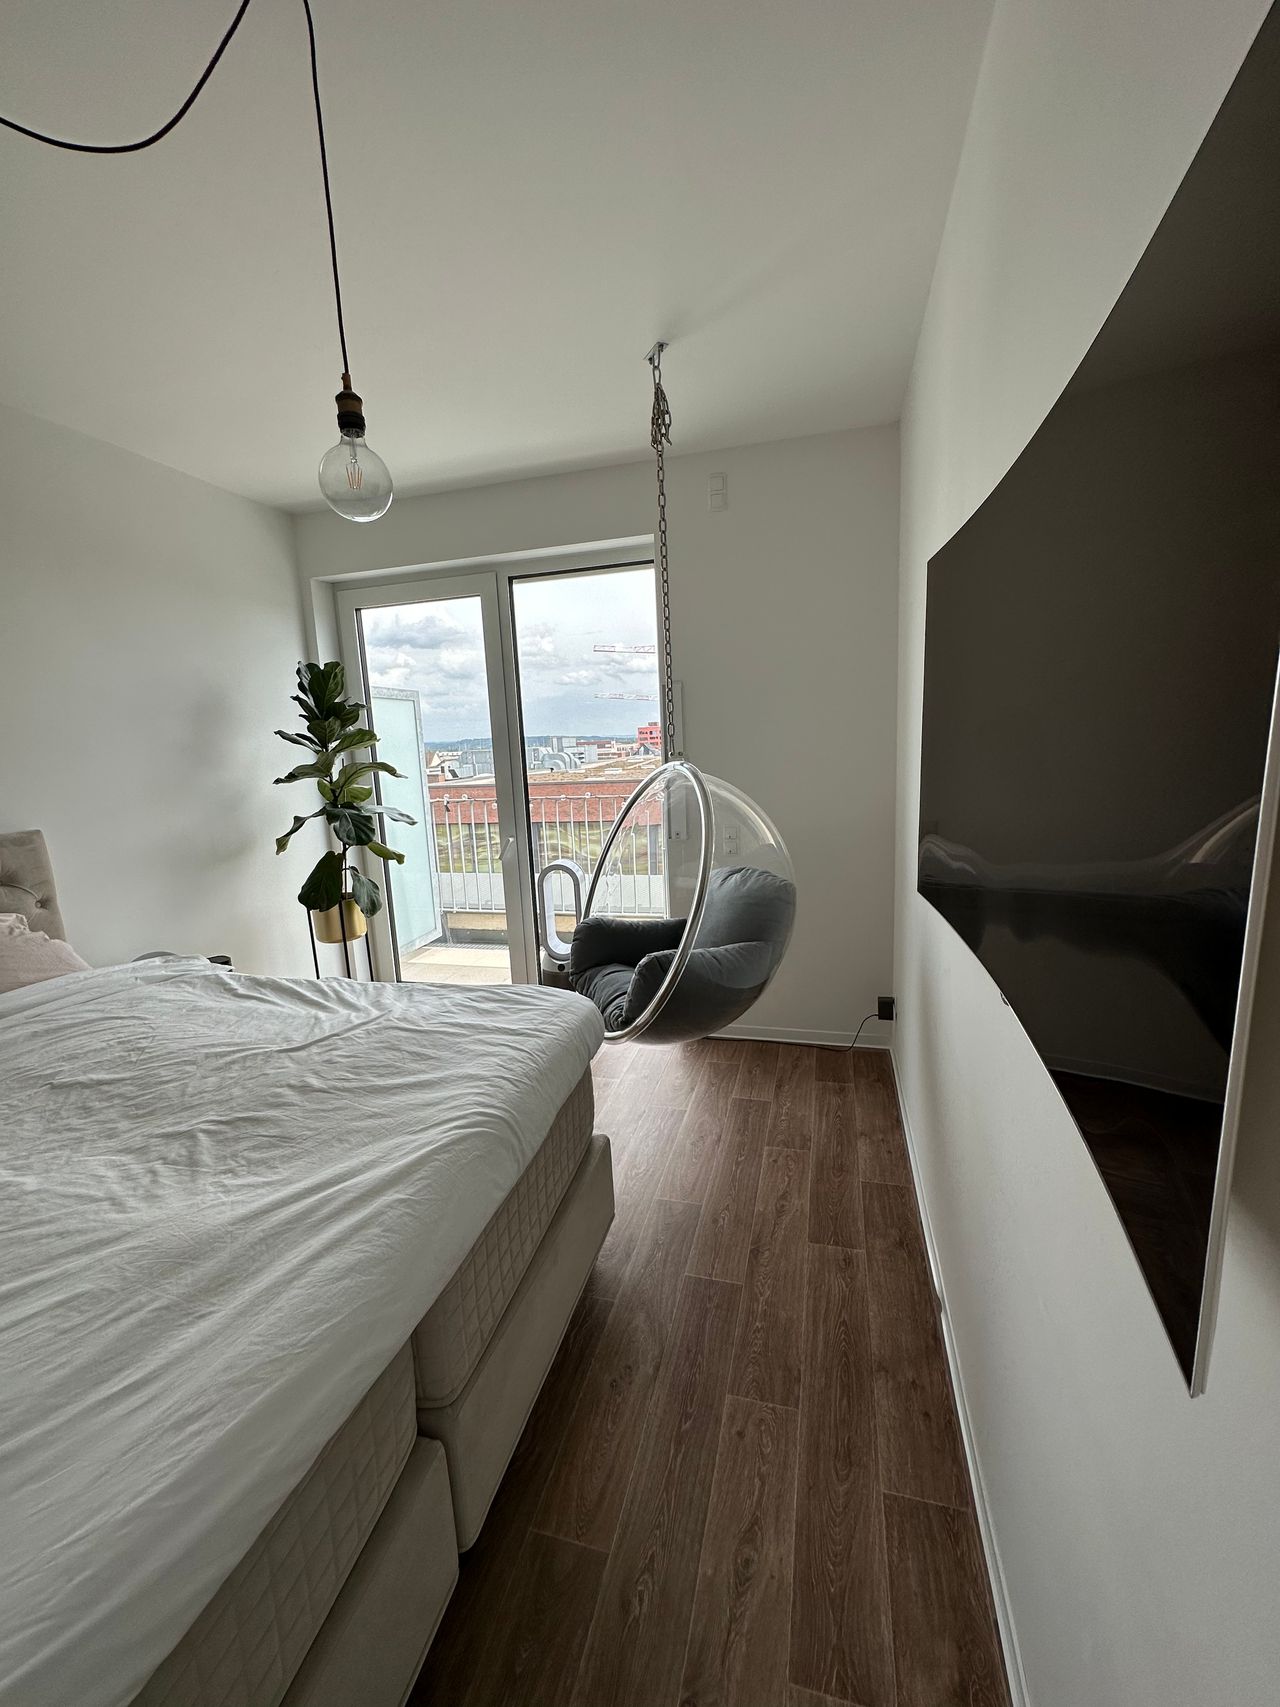 Luxurious penthouse with view over the roofs of Düsseldorf